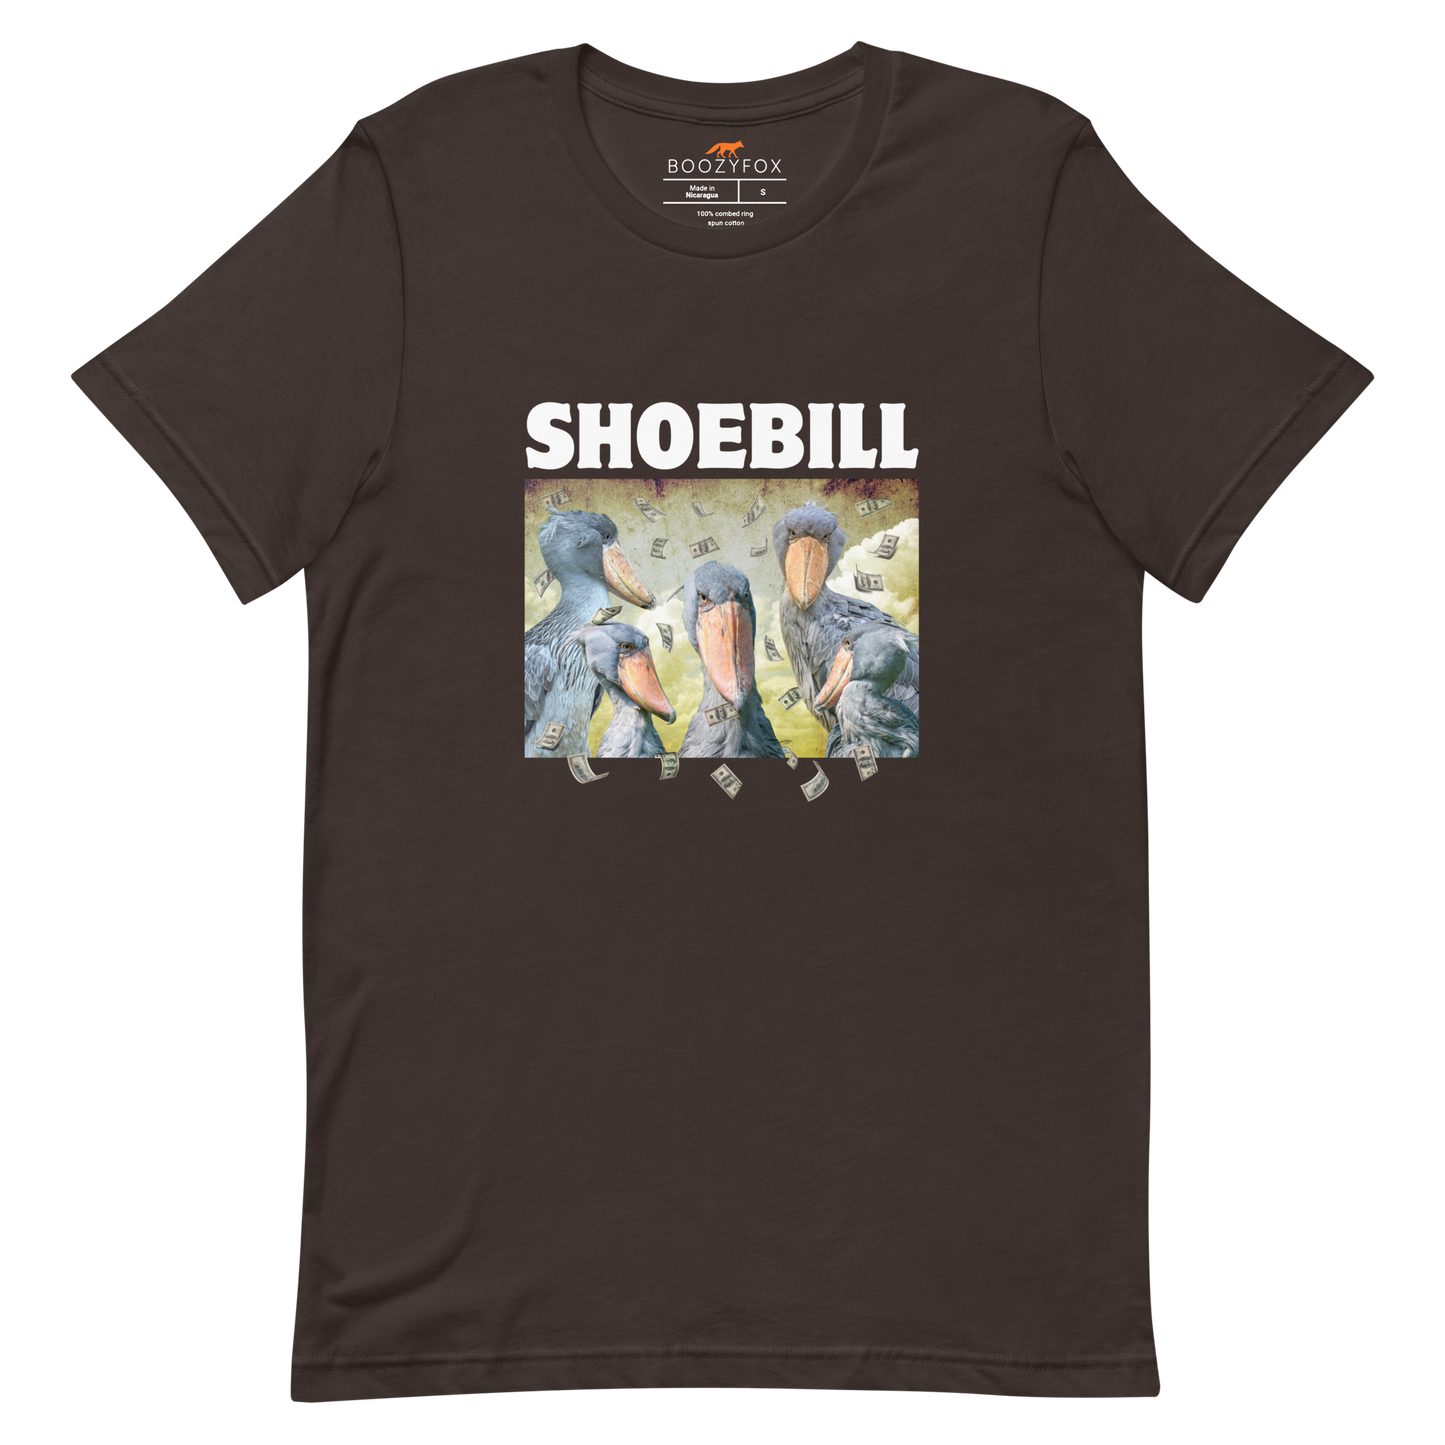 Brown Premium Shoebill Tee featuring cool Shoebill graphic on the chest - Artsy/Funny Graphic Shoebill Stork Tees - Boozy Fox